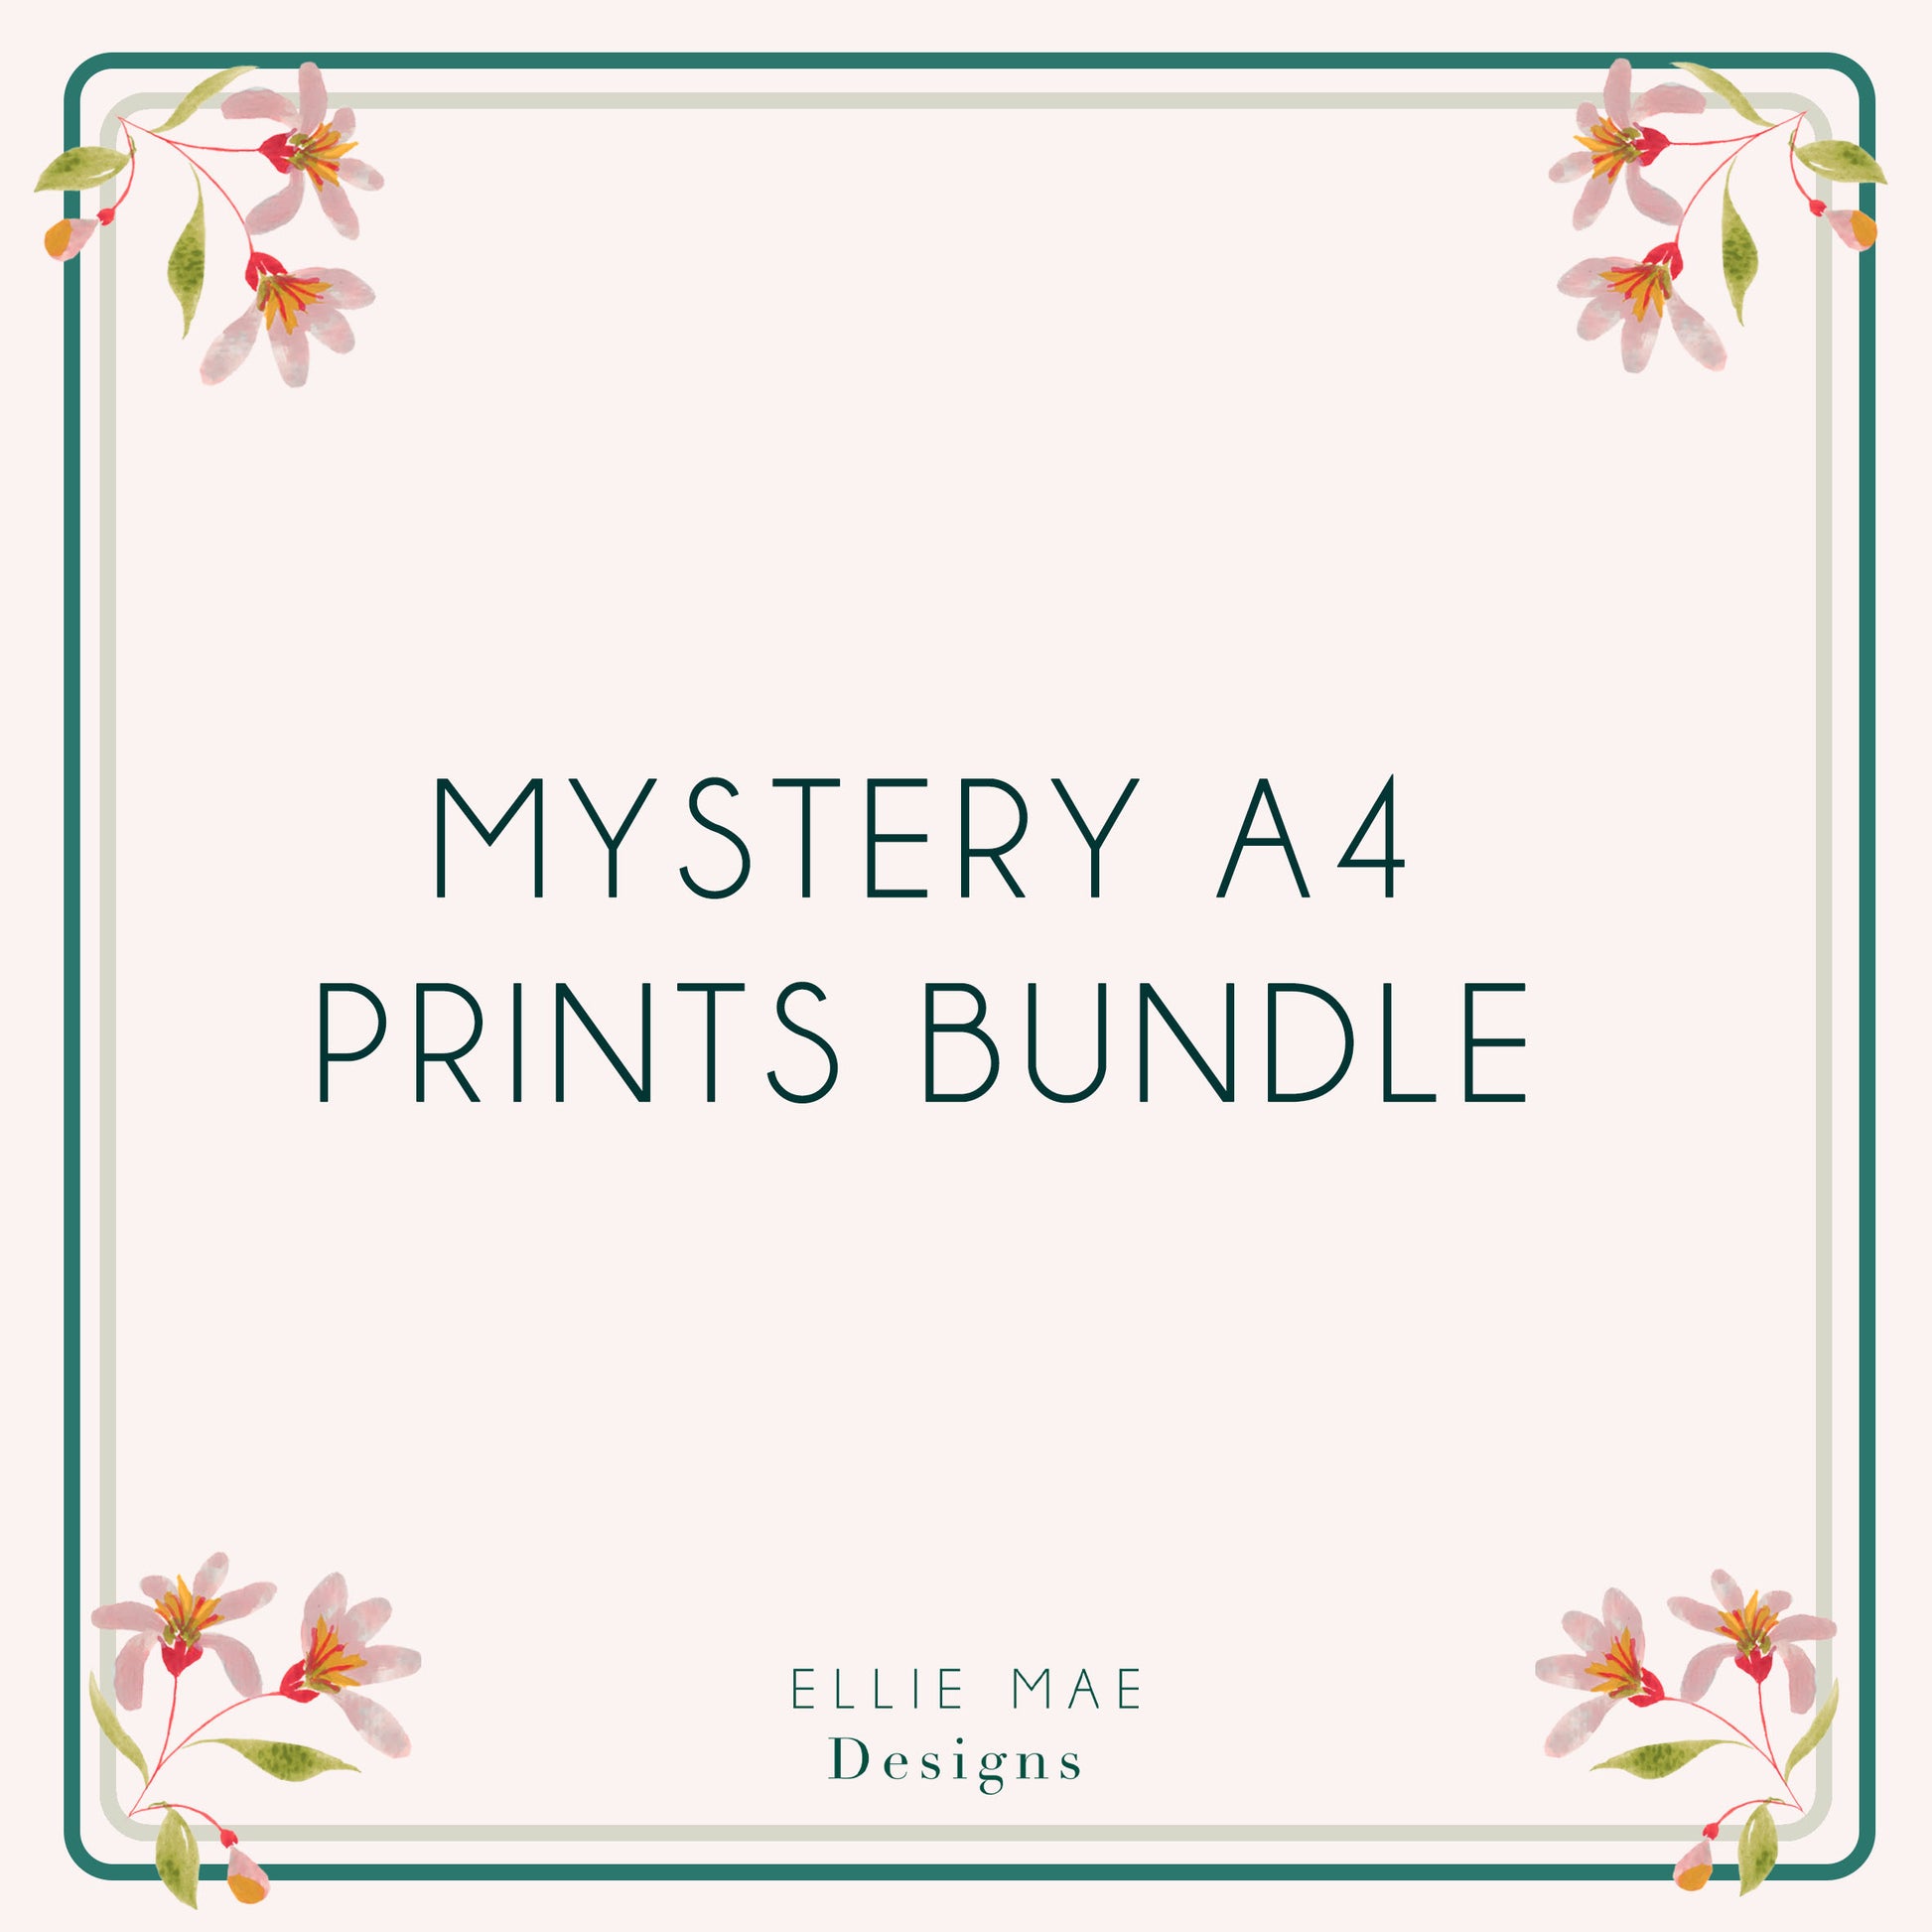 A4 mystery print bundle. Can't decide what prints to have, don't worry we will choose 3 cohesive prints at random for you! 